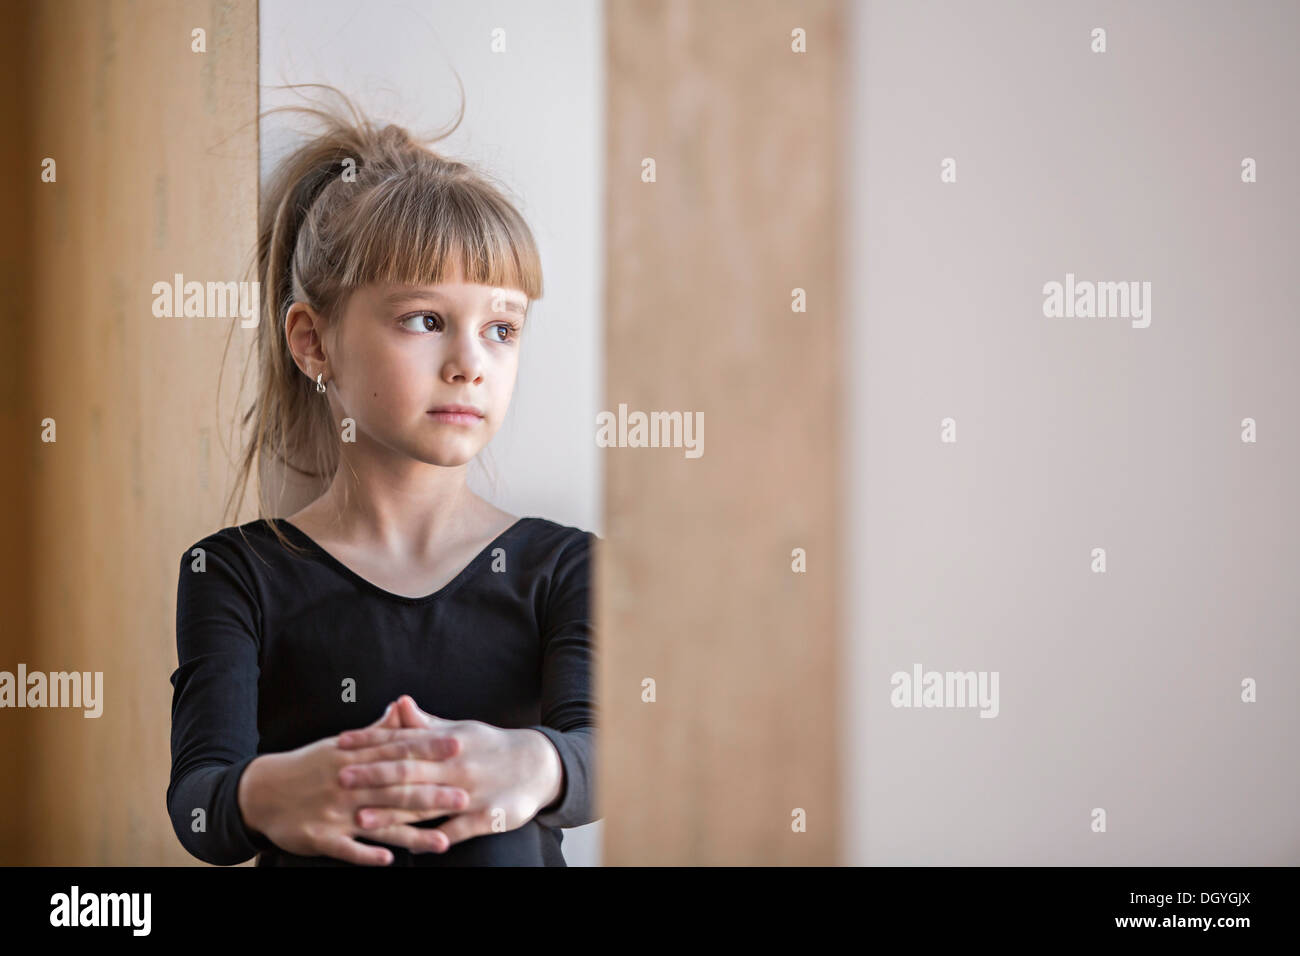 A young girl looking contemplative Stock Photo